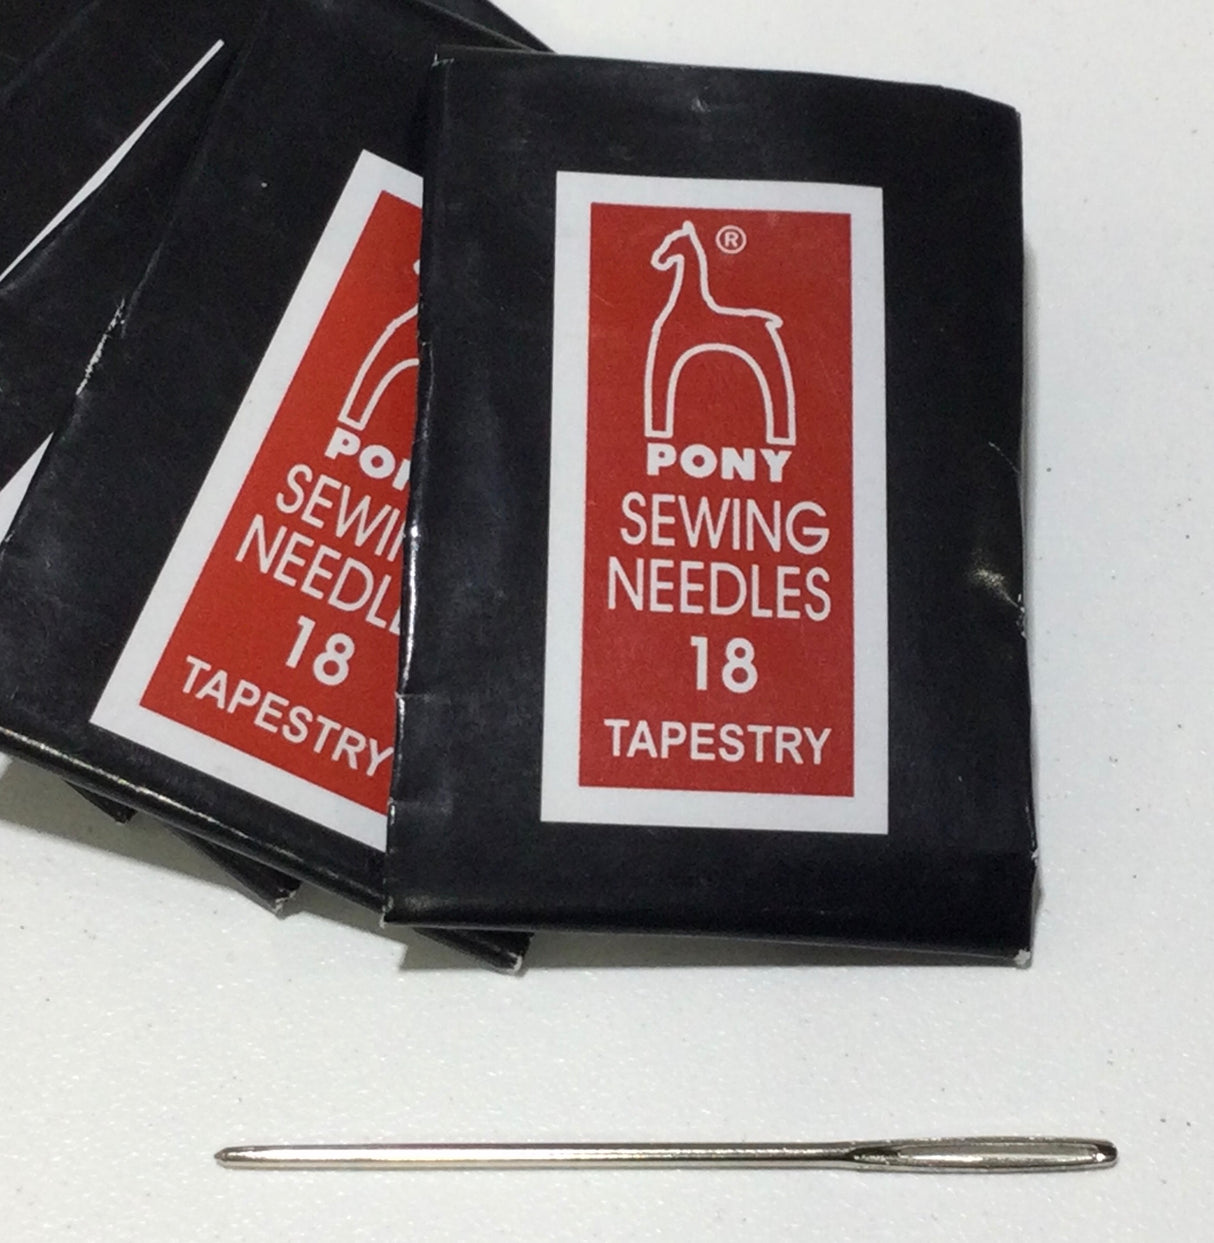 Tapestry Sewing Needles (25 pack) Size 18